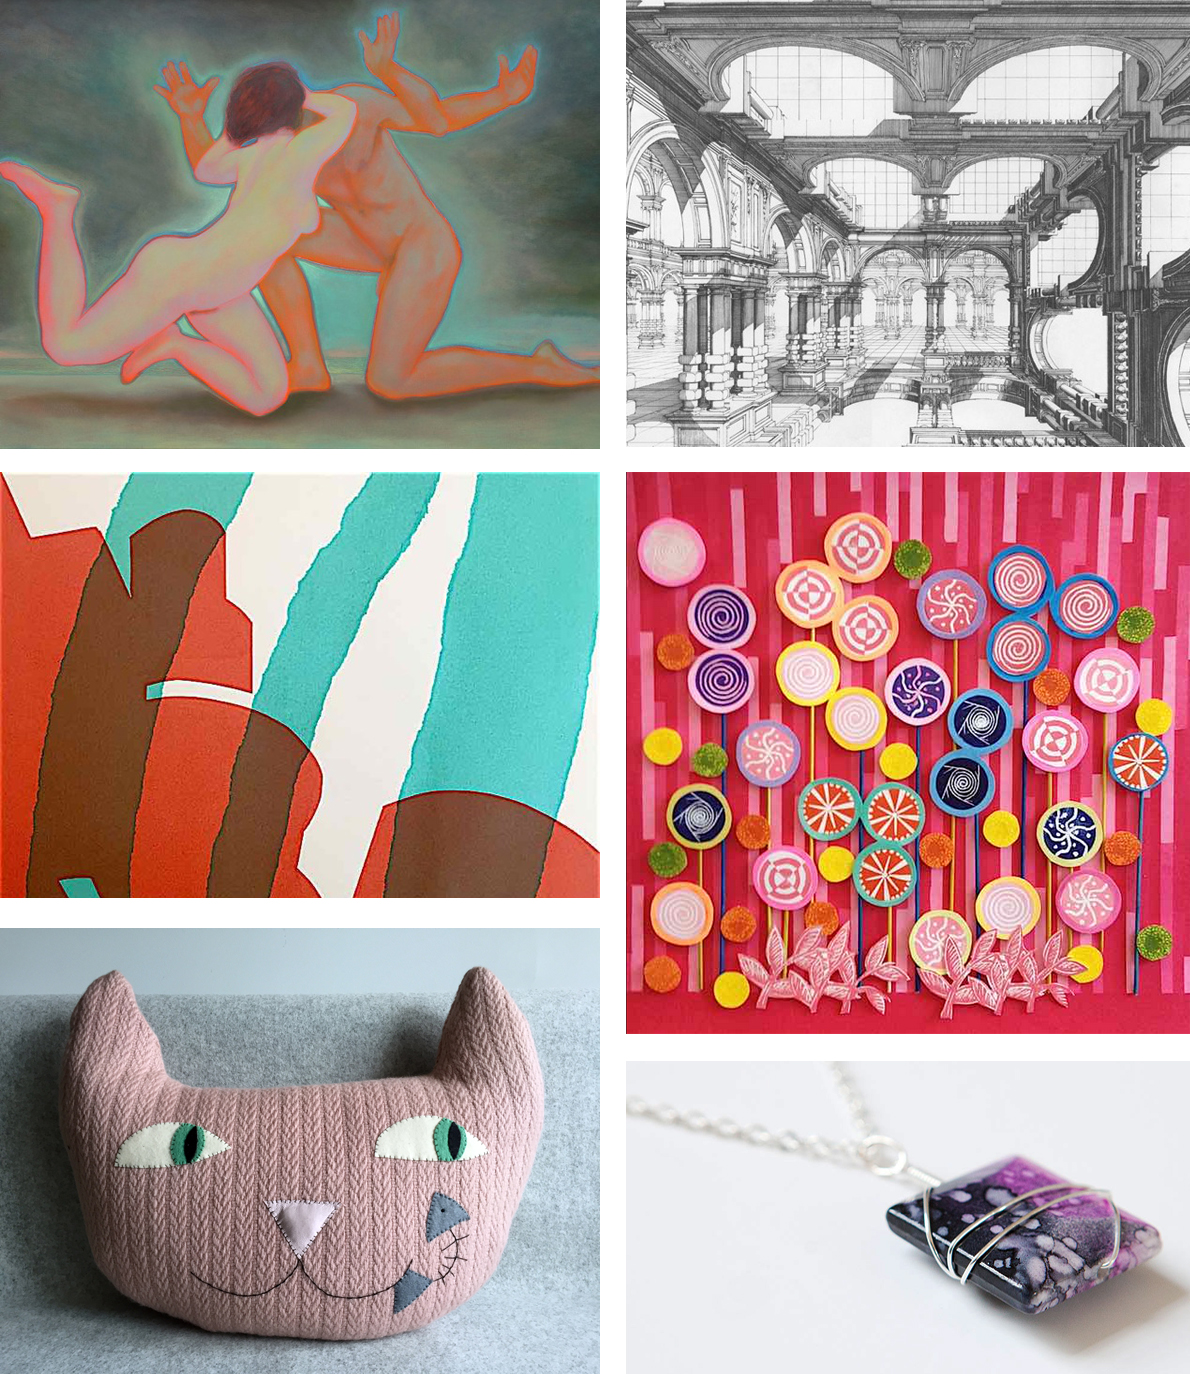 Camberwell open studios fine artists Emanuele Gori and Paul Draper, printmaker Pauline Amphlett, interior products by Mr & Mrs house, and Norwegian crafts by Smed